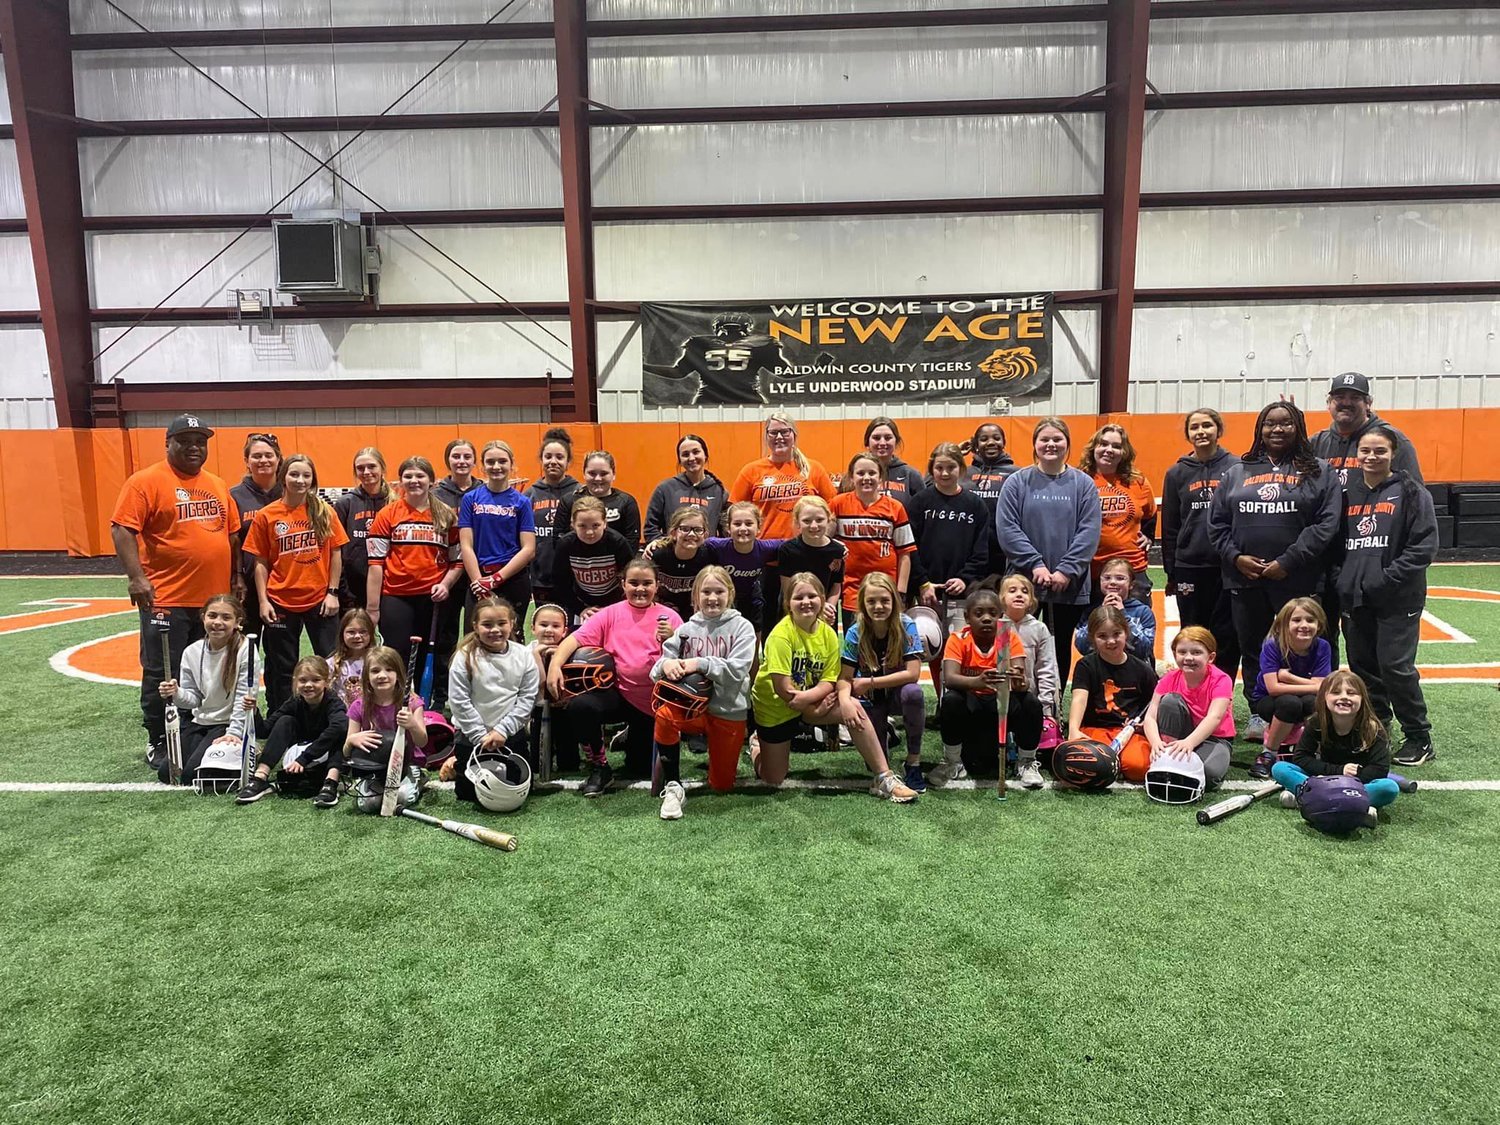 Saturday, Jan. 21, Baldwin County High School and the Bay Minette Recreation Department hosted a free softball clinic for young athletes to learn the fundamentals of the game.